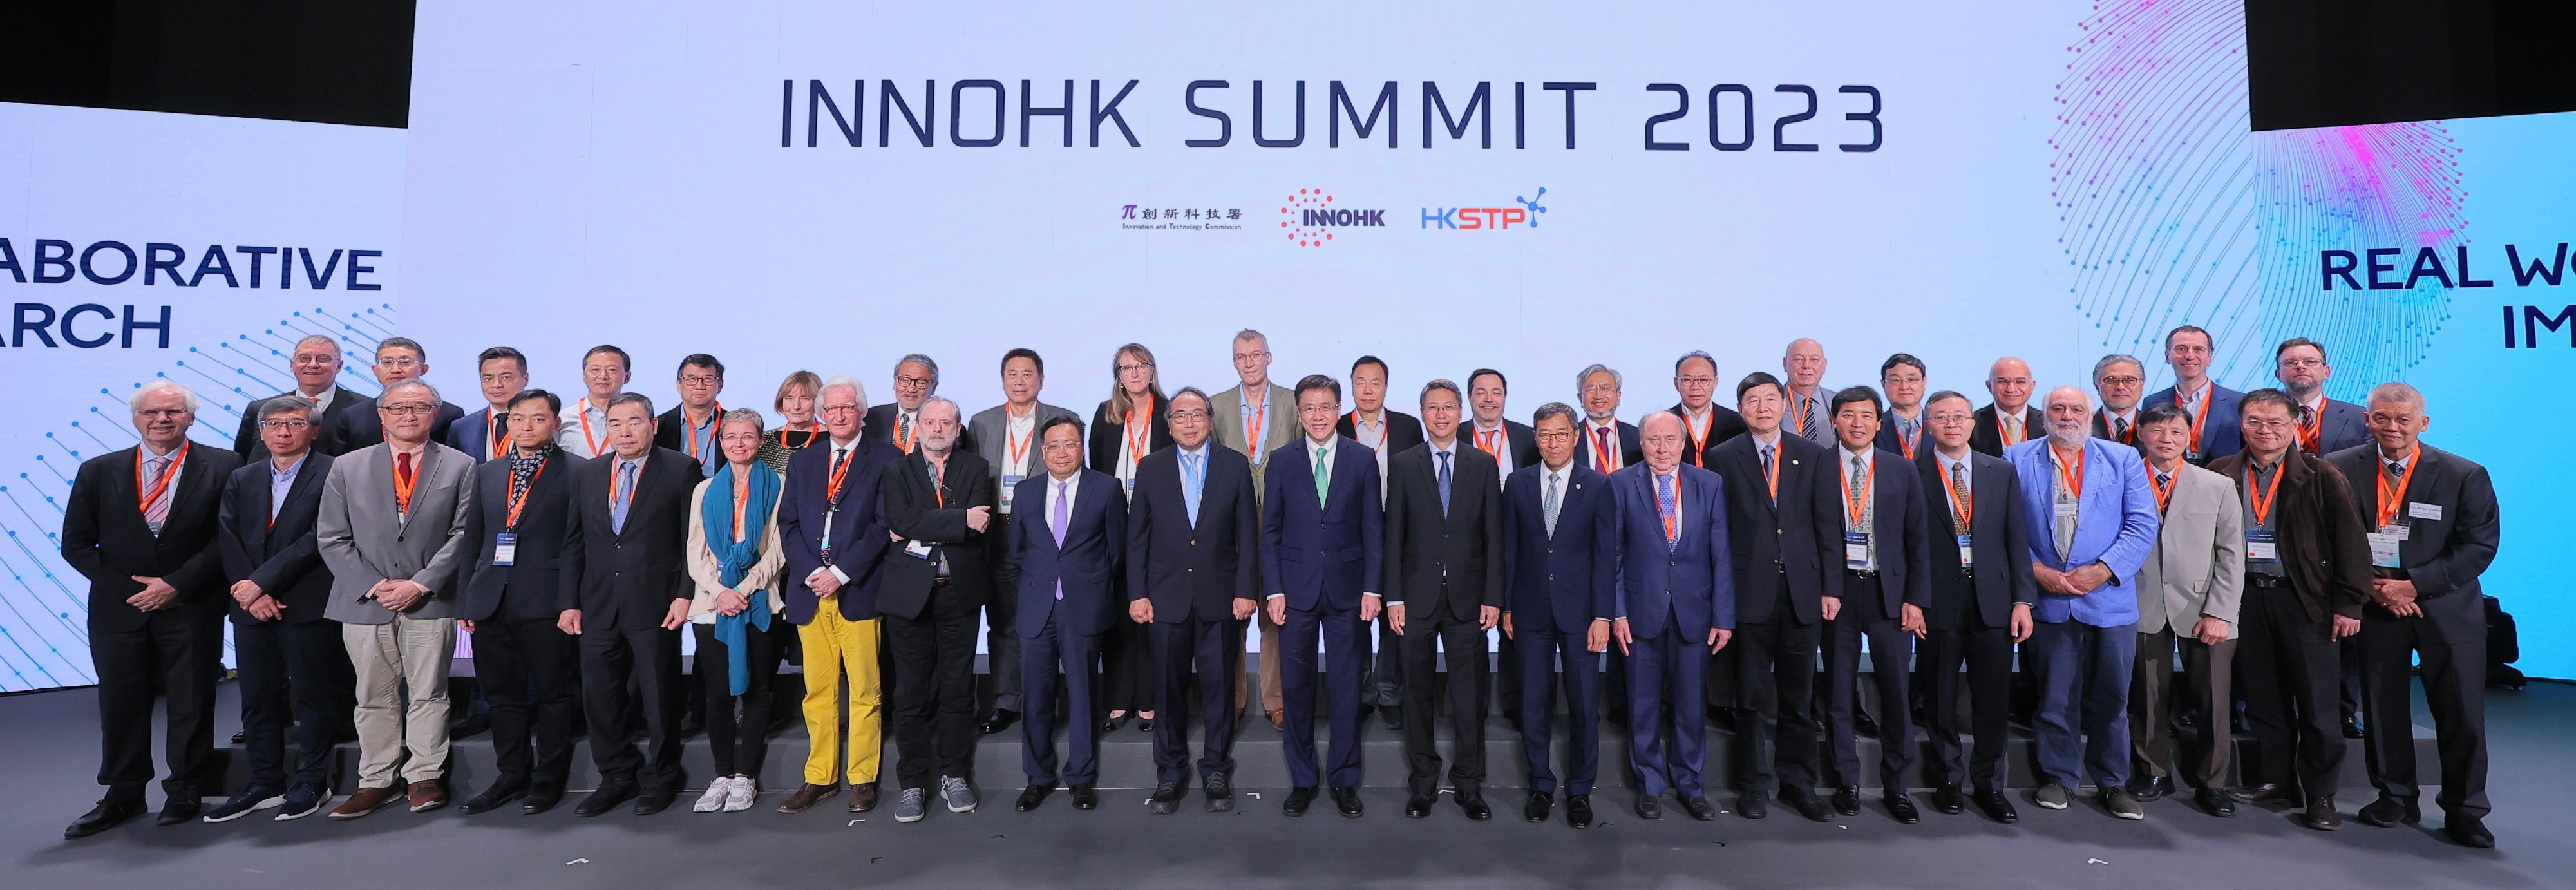 Organised by the Innovation and Technology Commission and the Hong Kong Science and Technology Parks Corporation (HKSTPC), the InnoHK Summit 2023 was held at Hong Kong Science Park today (December 6). Photo shows the Secretary for Innovation, Technology and Industry, Professor Sun Dong (front row, centre); the Founding President of the Hong Kong Academy of Sciences and Chairman of the InnoHK Steering Committee, Professor Tsui Lap-chee (front row, 10th left); the Permanent Secretary for Innovation, Technology and Industry, Mr Eddie Mak (front row, 10th right); the Commissioner for Innovation and Technology, Mr Ivan Lee (front row, ninth left); and the Chief Executive Officer of the HKSTPC, Mr Albert Wong (front row, ninth right), with members of the InnoHK Scientific Committee.